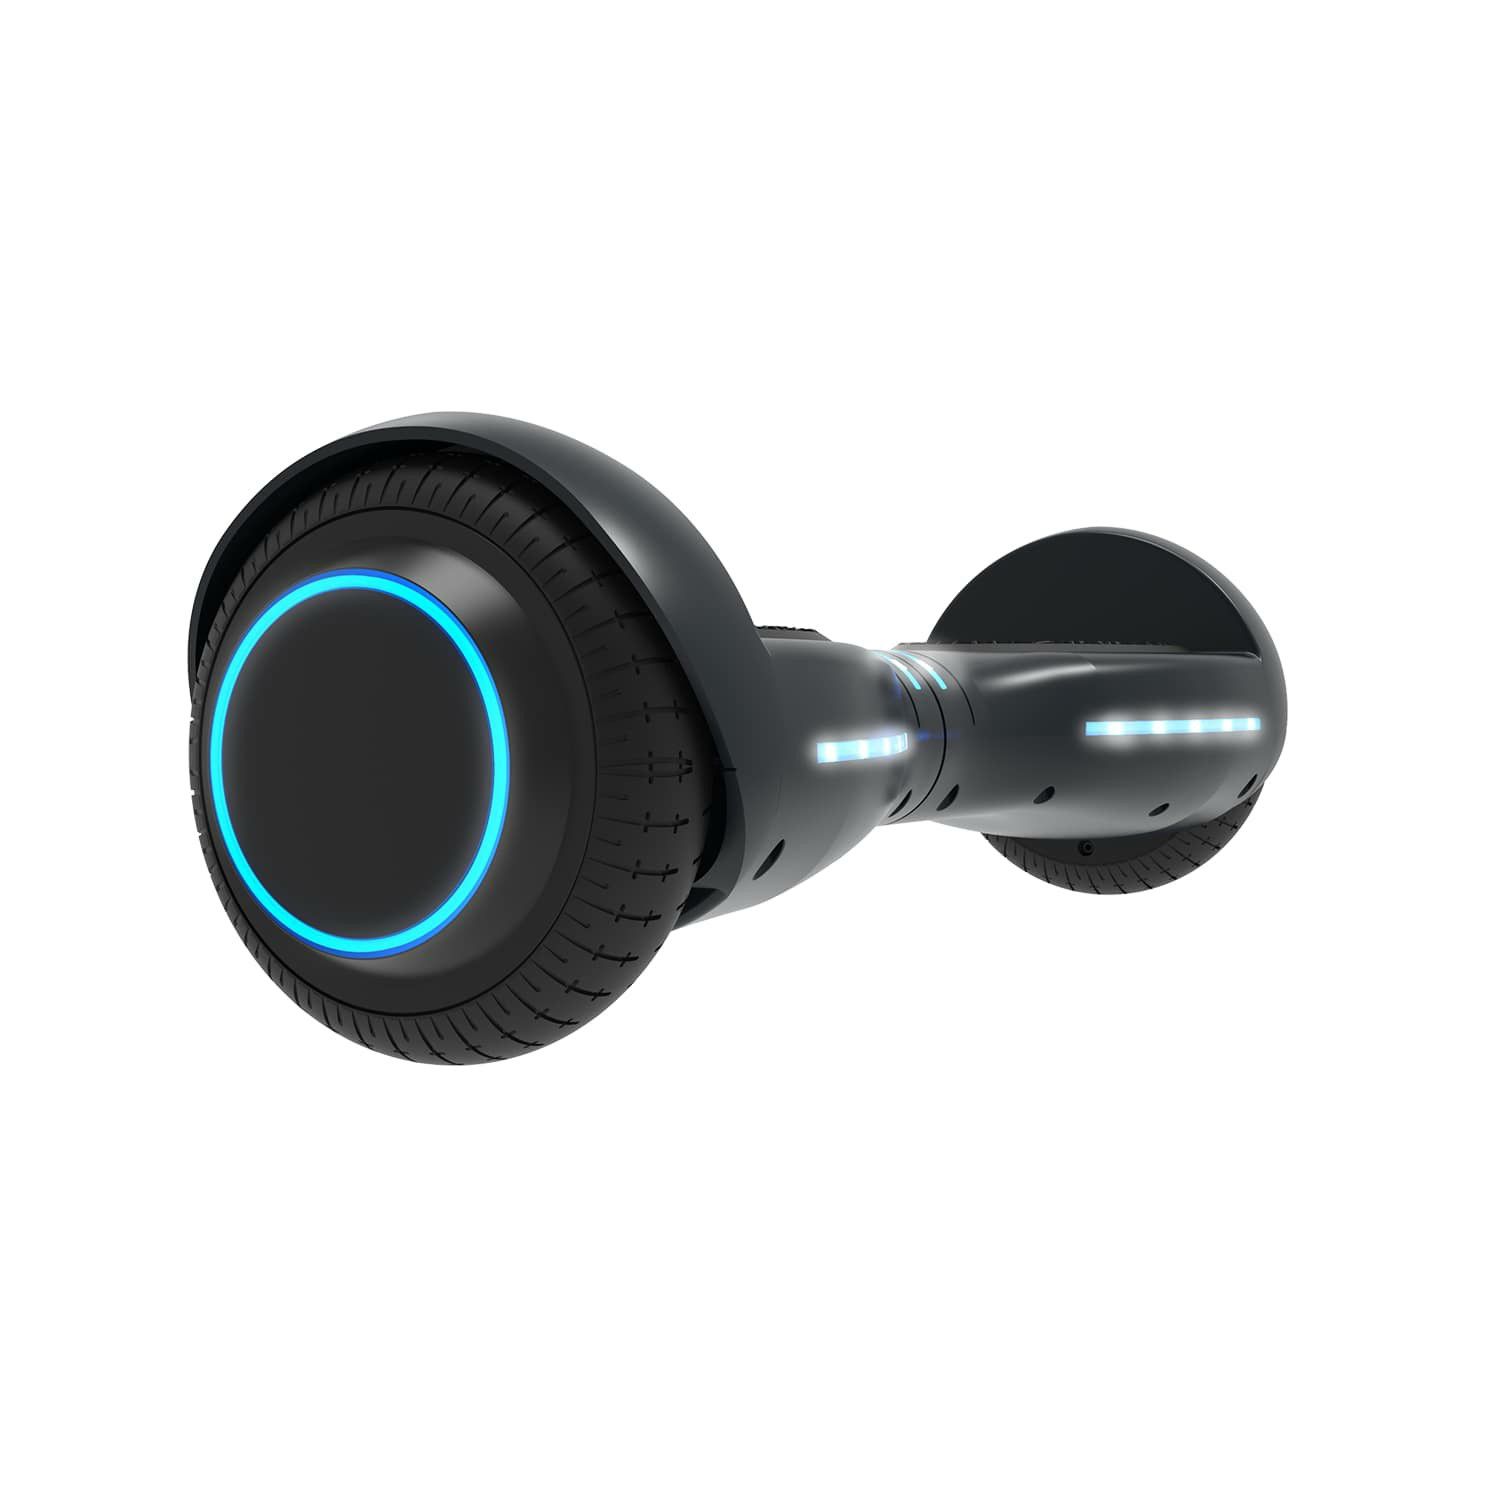 Brand new flux hoverboard